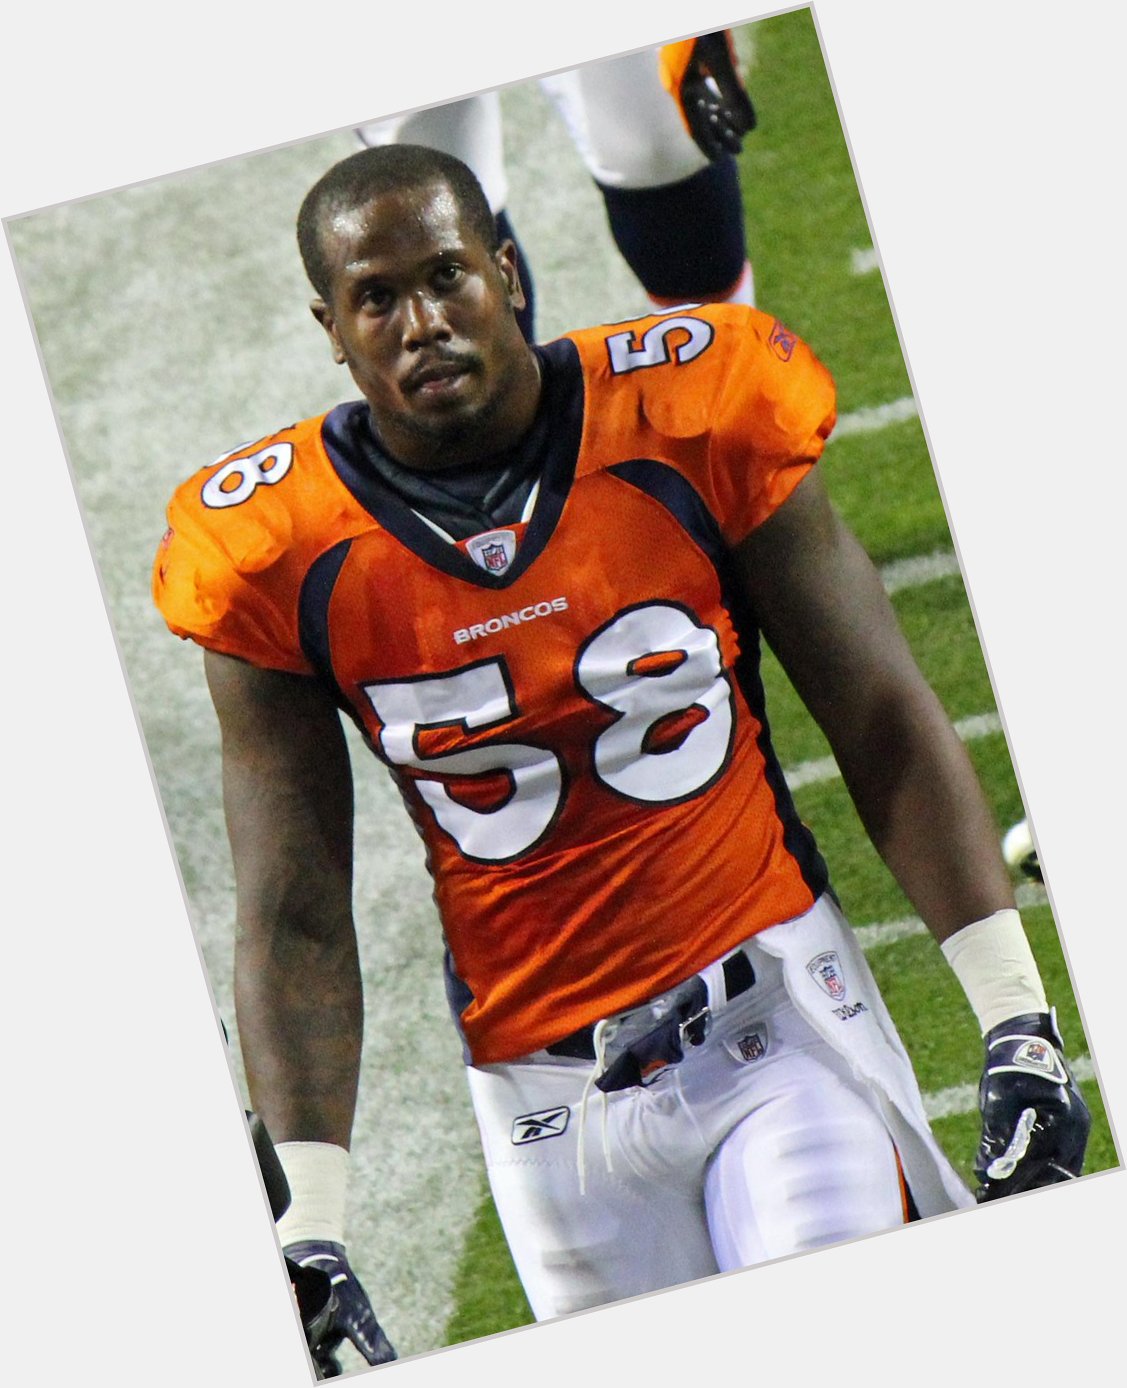 Happy 26th birthday to the one and only Von Miller! Congratulations 